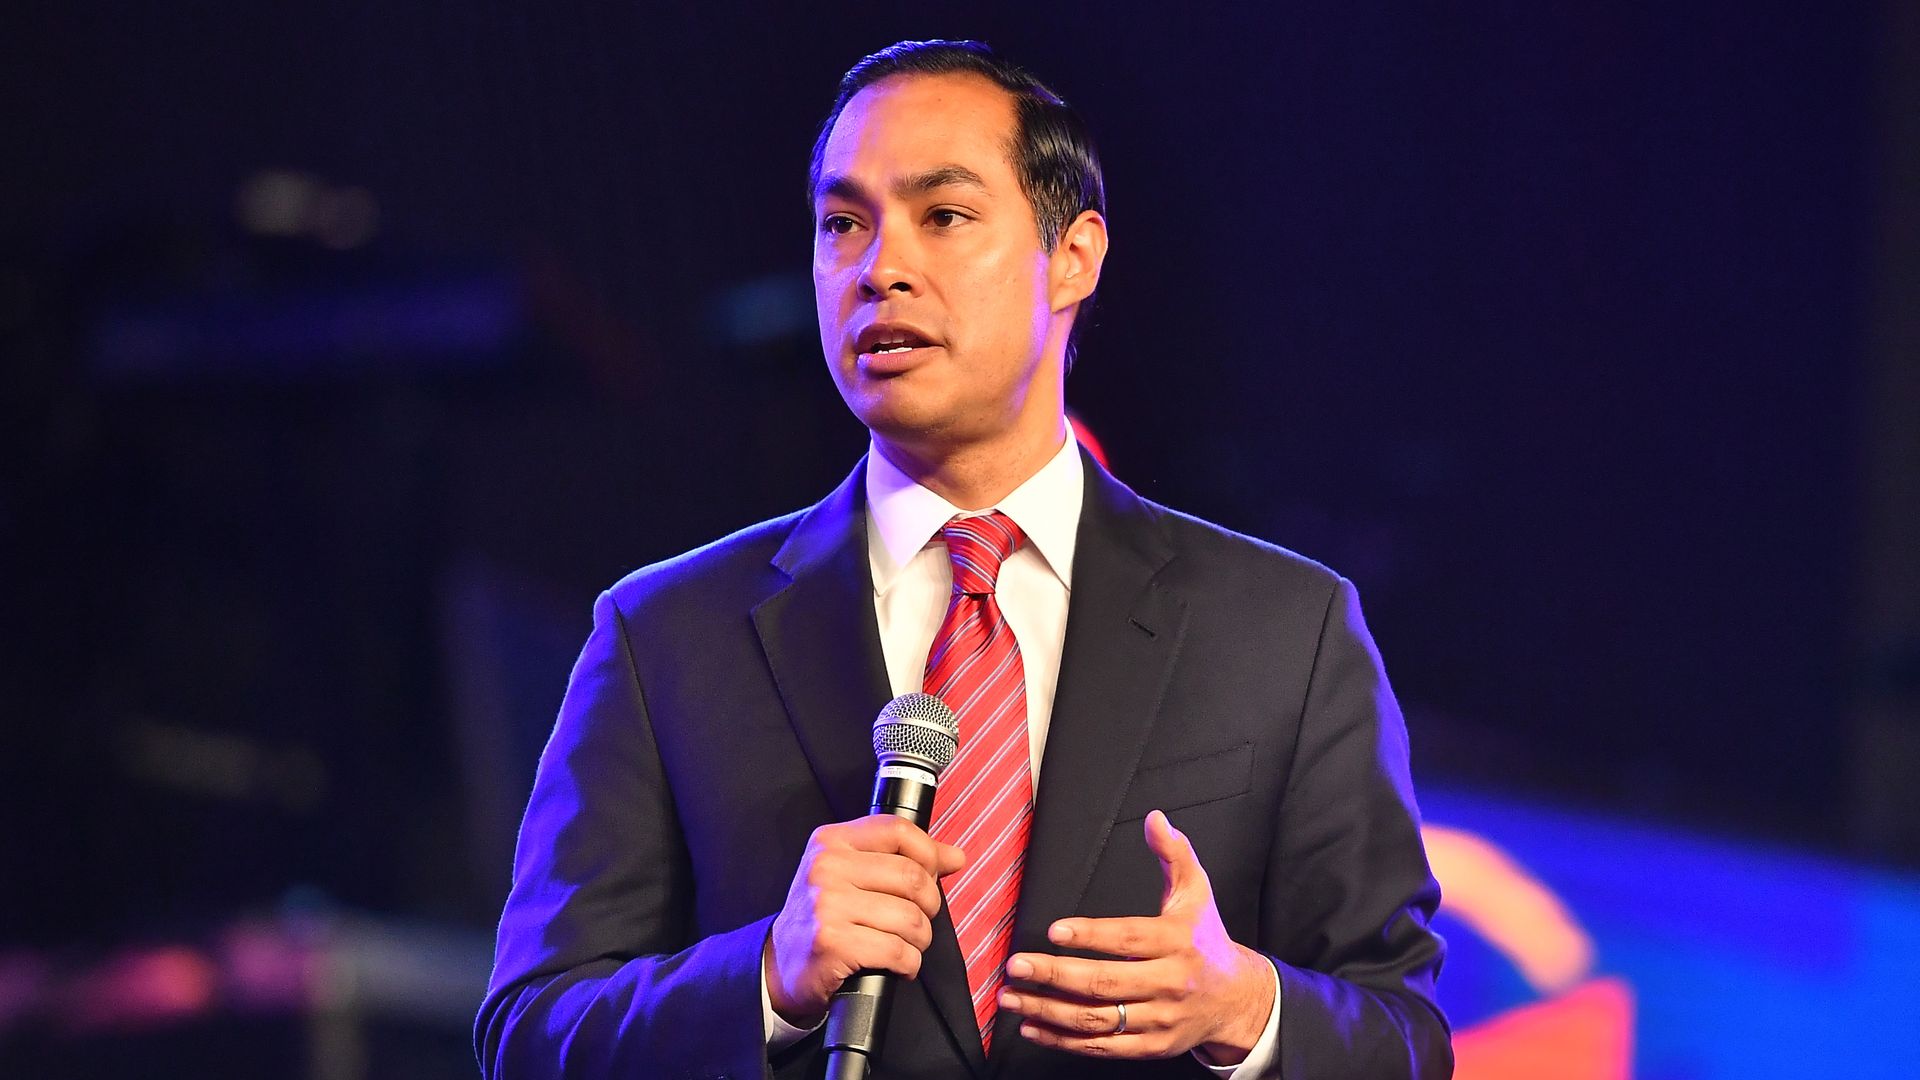  Democratic presidential candidate Julian Castro speaks on stage during Young Leaders Conference 2019 